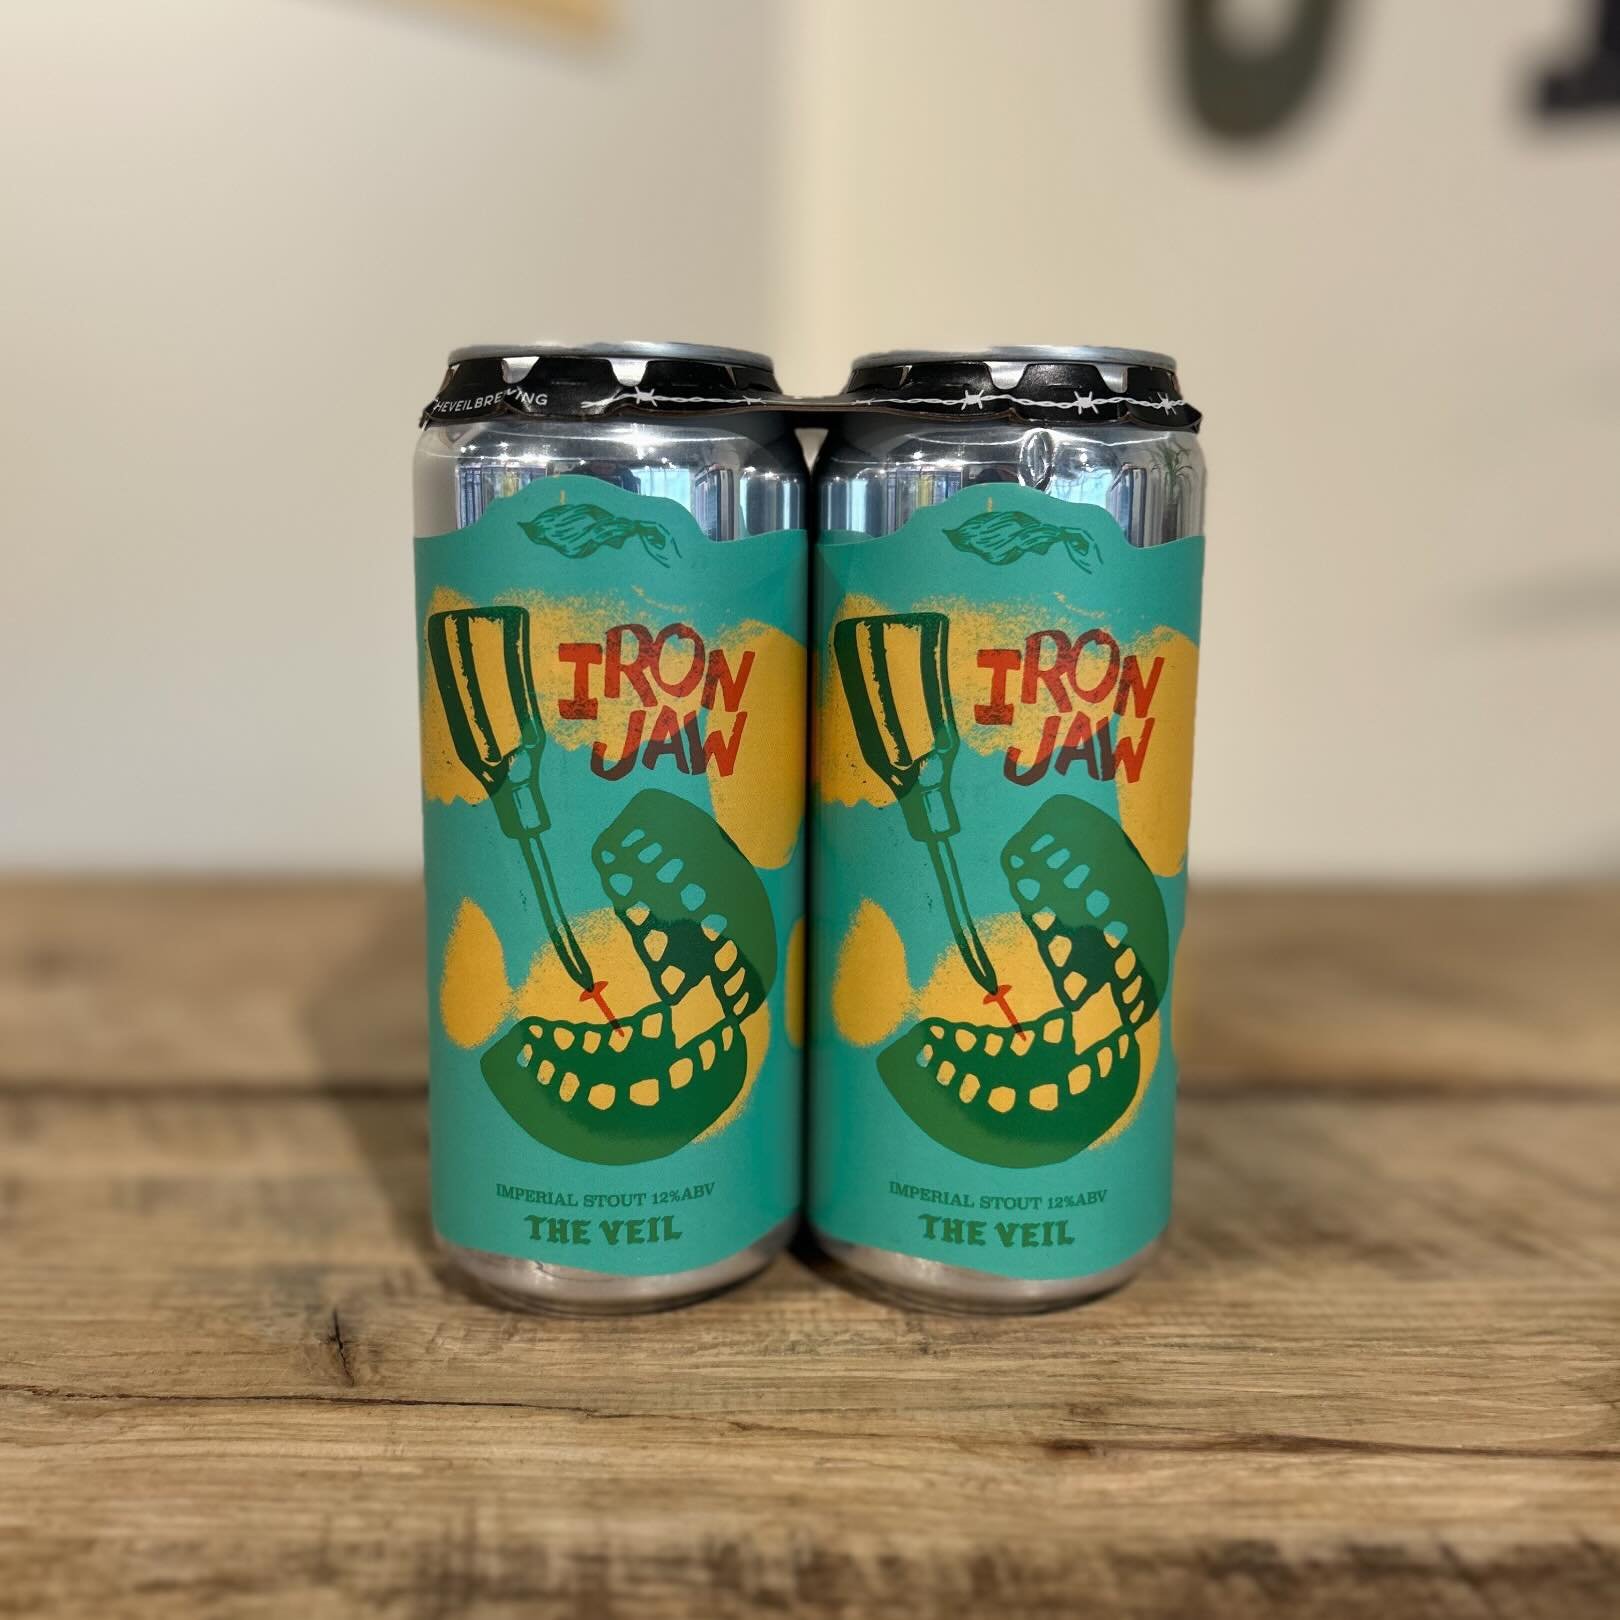 Welcoming @theveilbrewing back to the shop this week #NowAvailable #SudburyCraftBeer #SudburyMA
&mdash;
Iron Jaw 🦷
Iron Jaw (12%) is a brand new Imperial Stout. Half of this batch is fresh, while the other half is blended barrel aged stock of differ